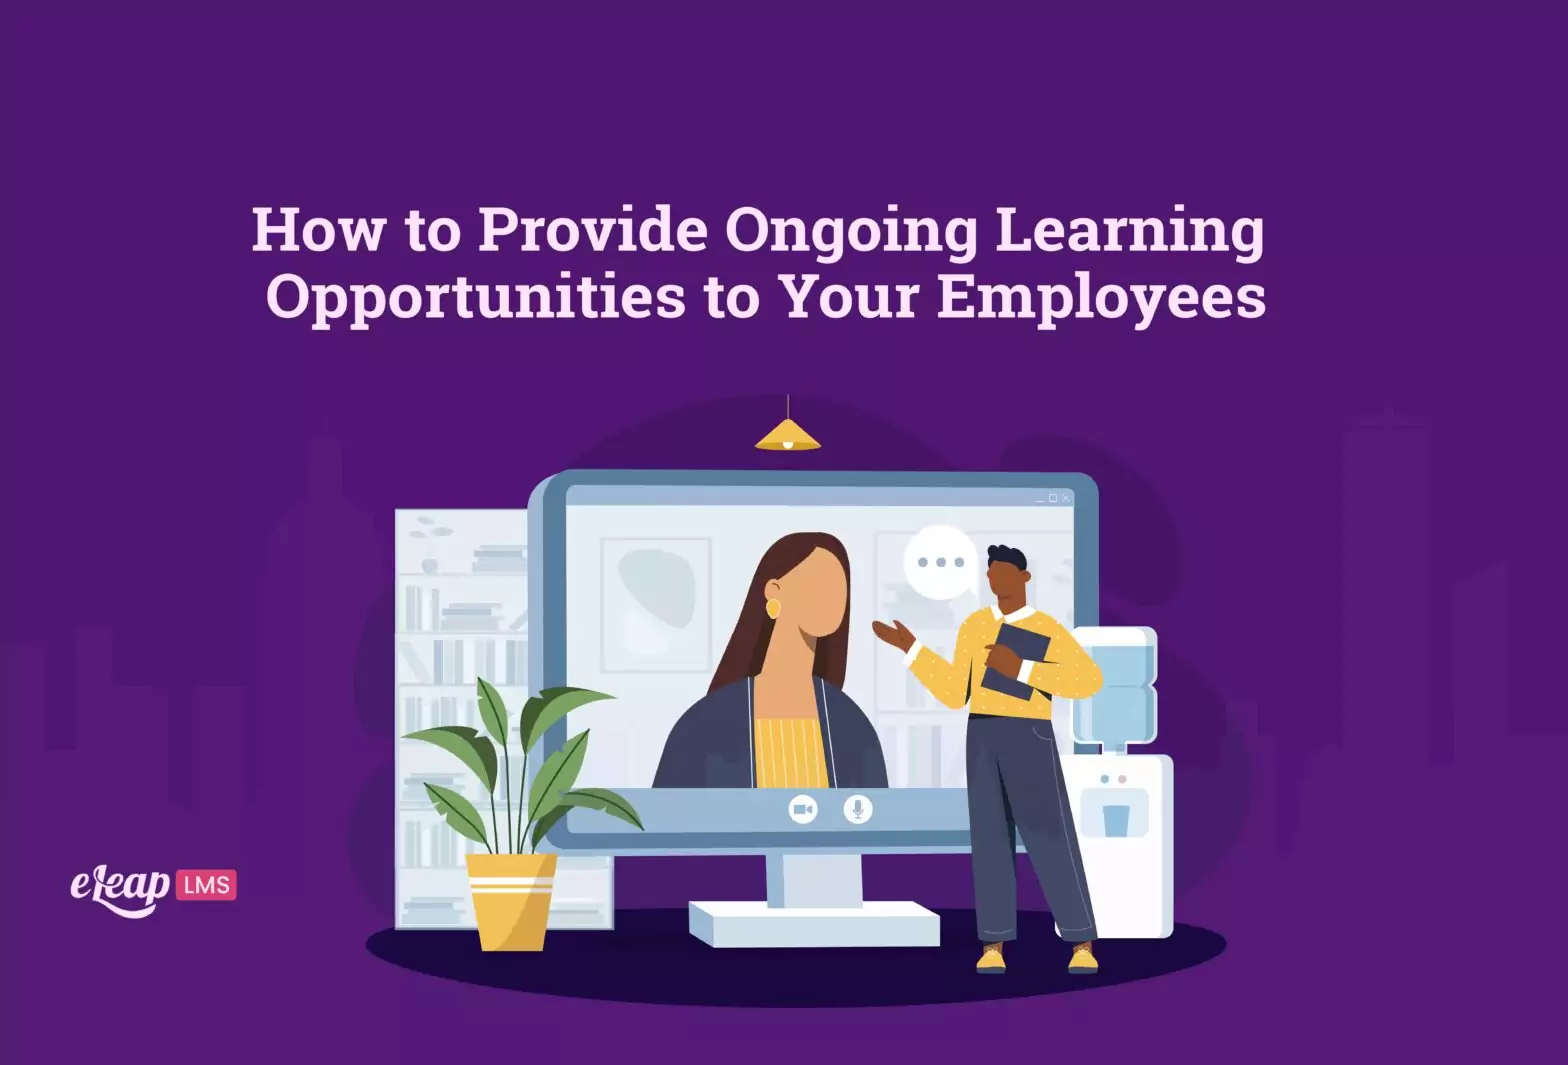 How to Provide Ongoing Learning Opportunities to Your Employees